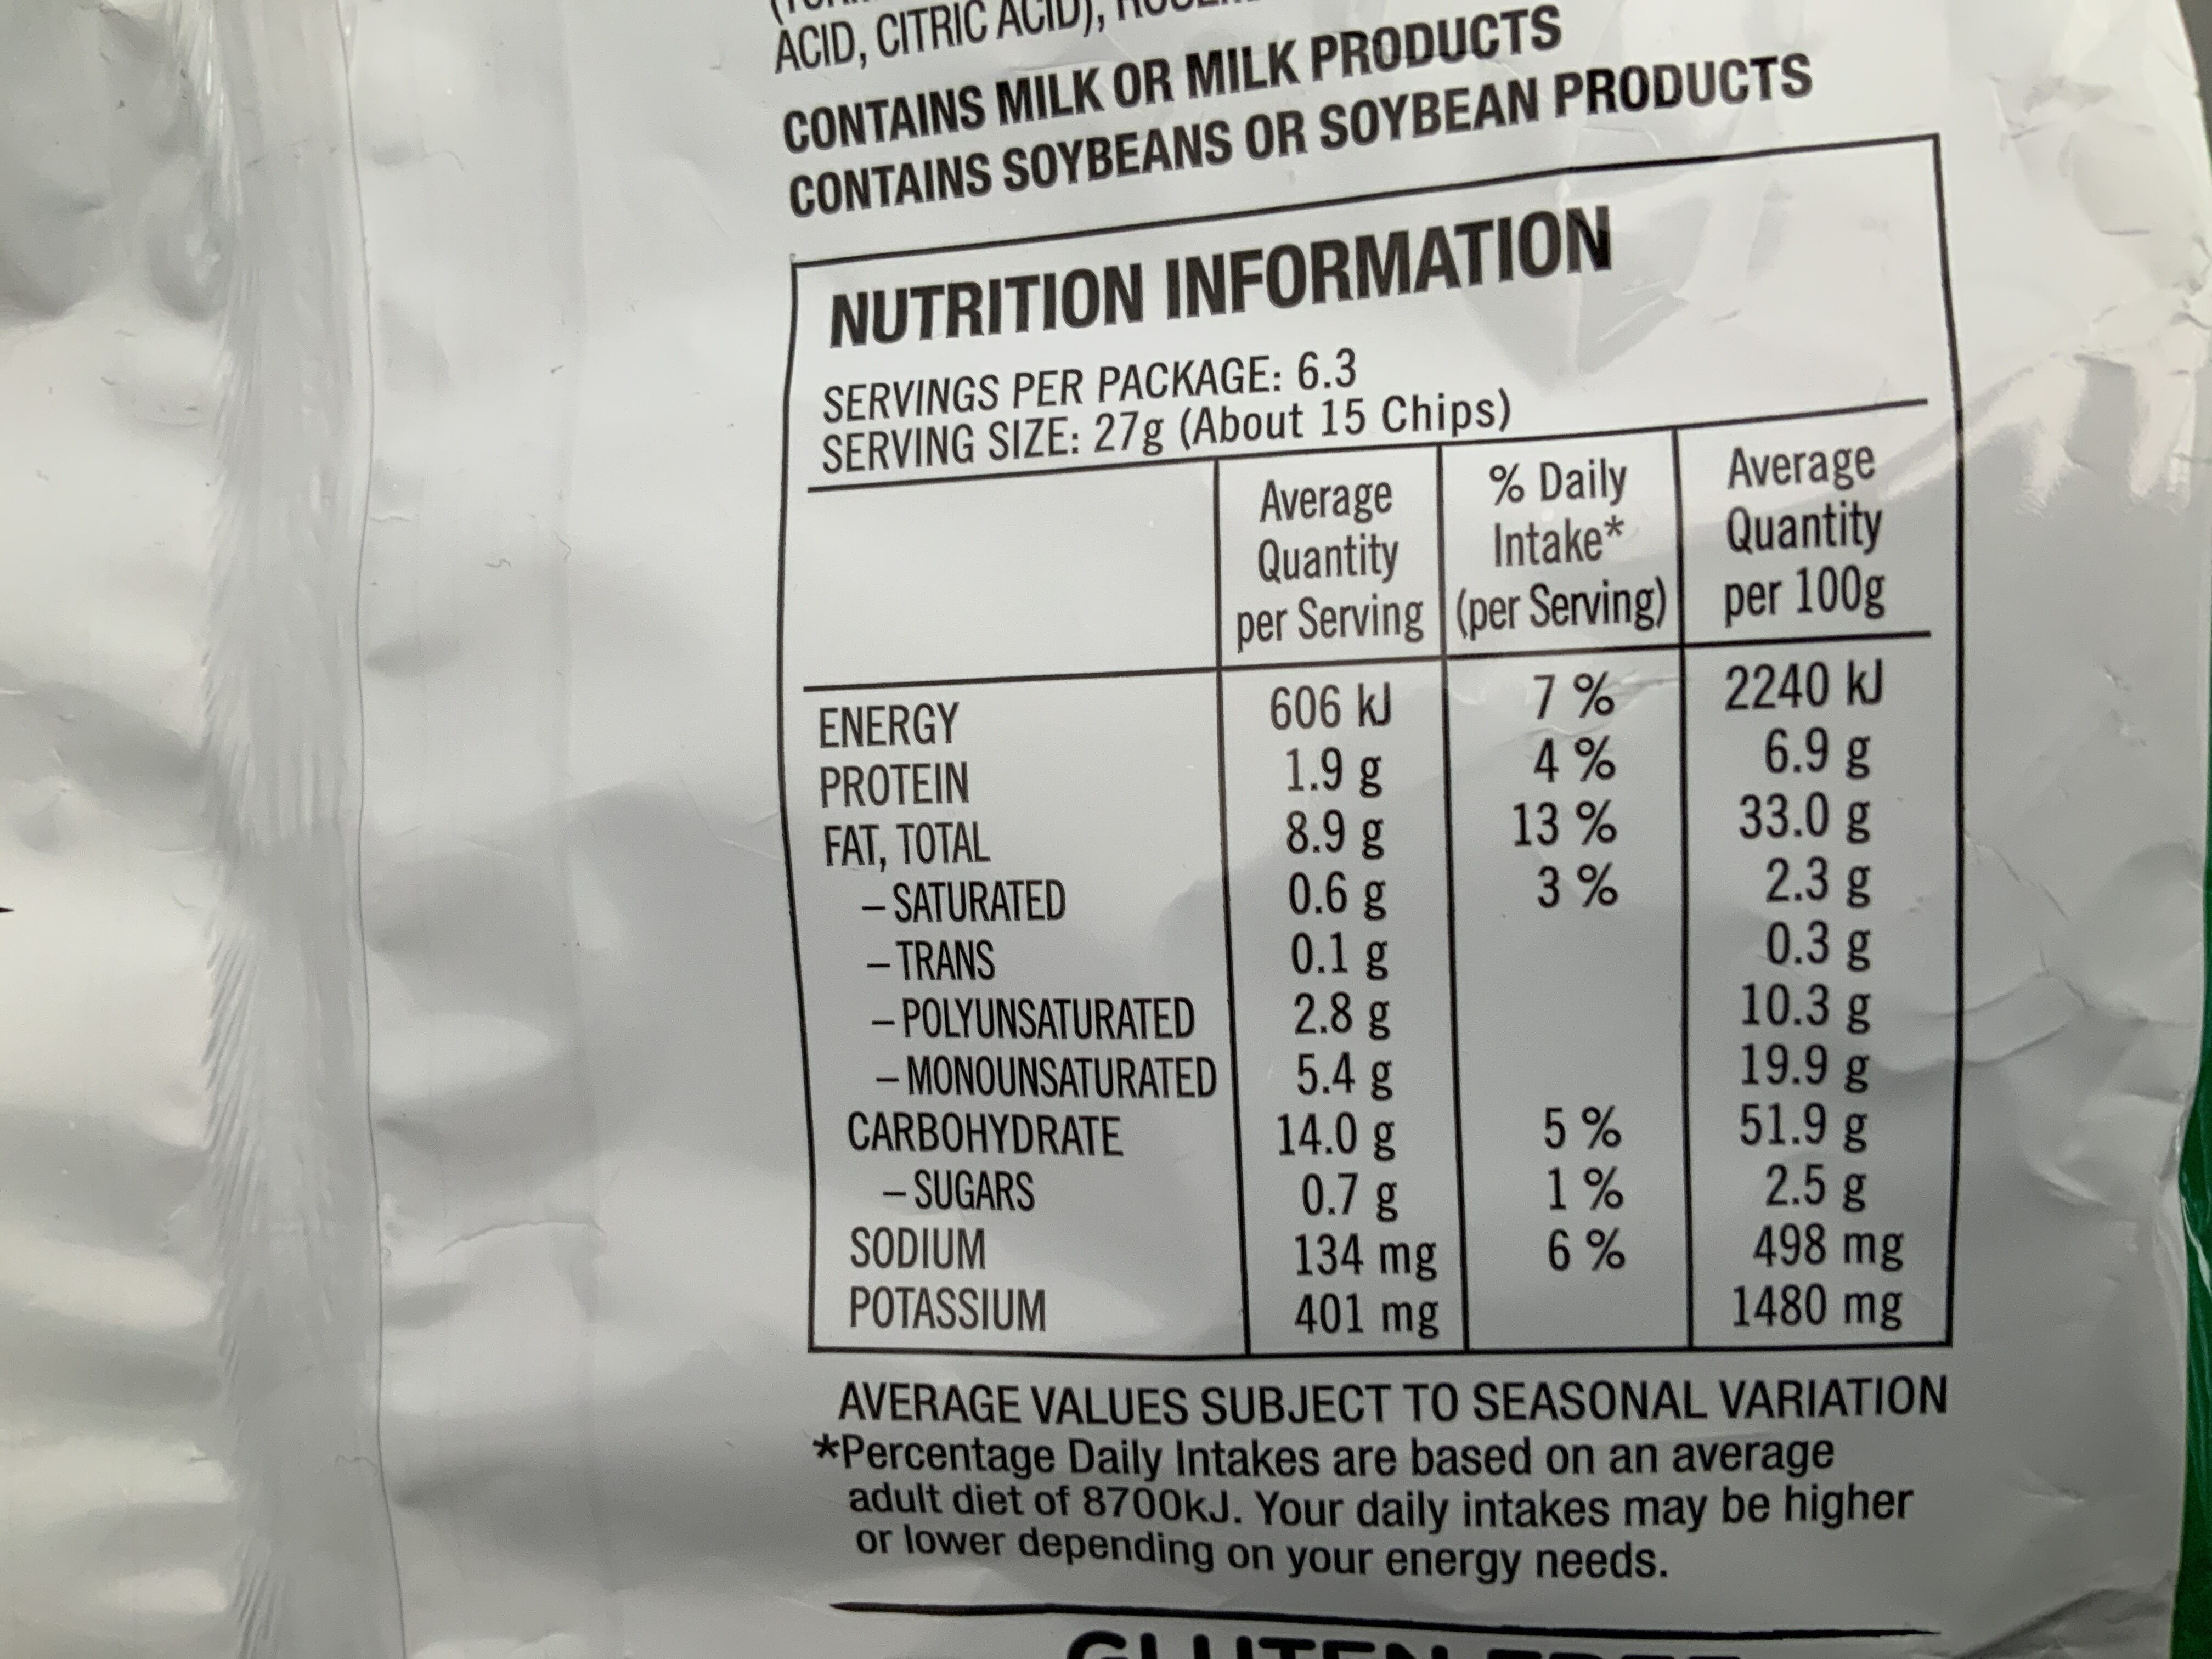  - Nutrition facts